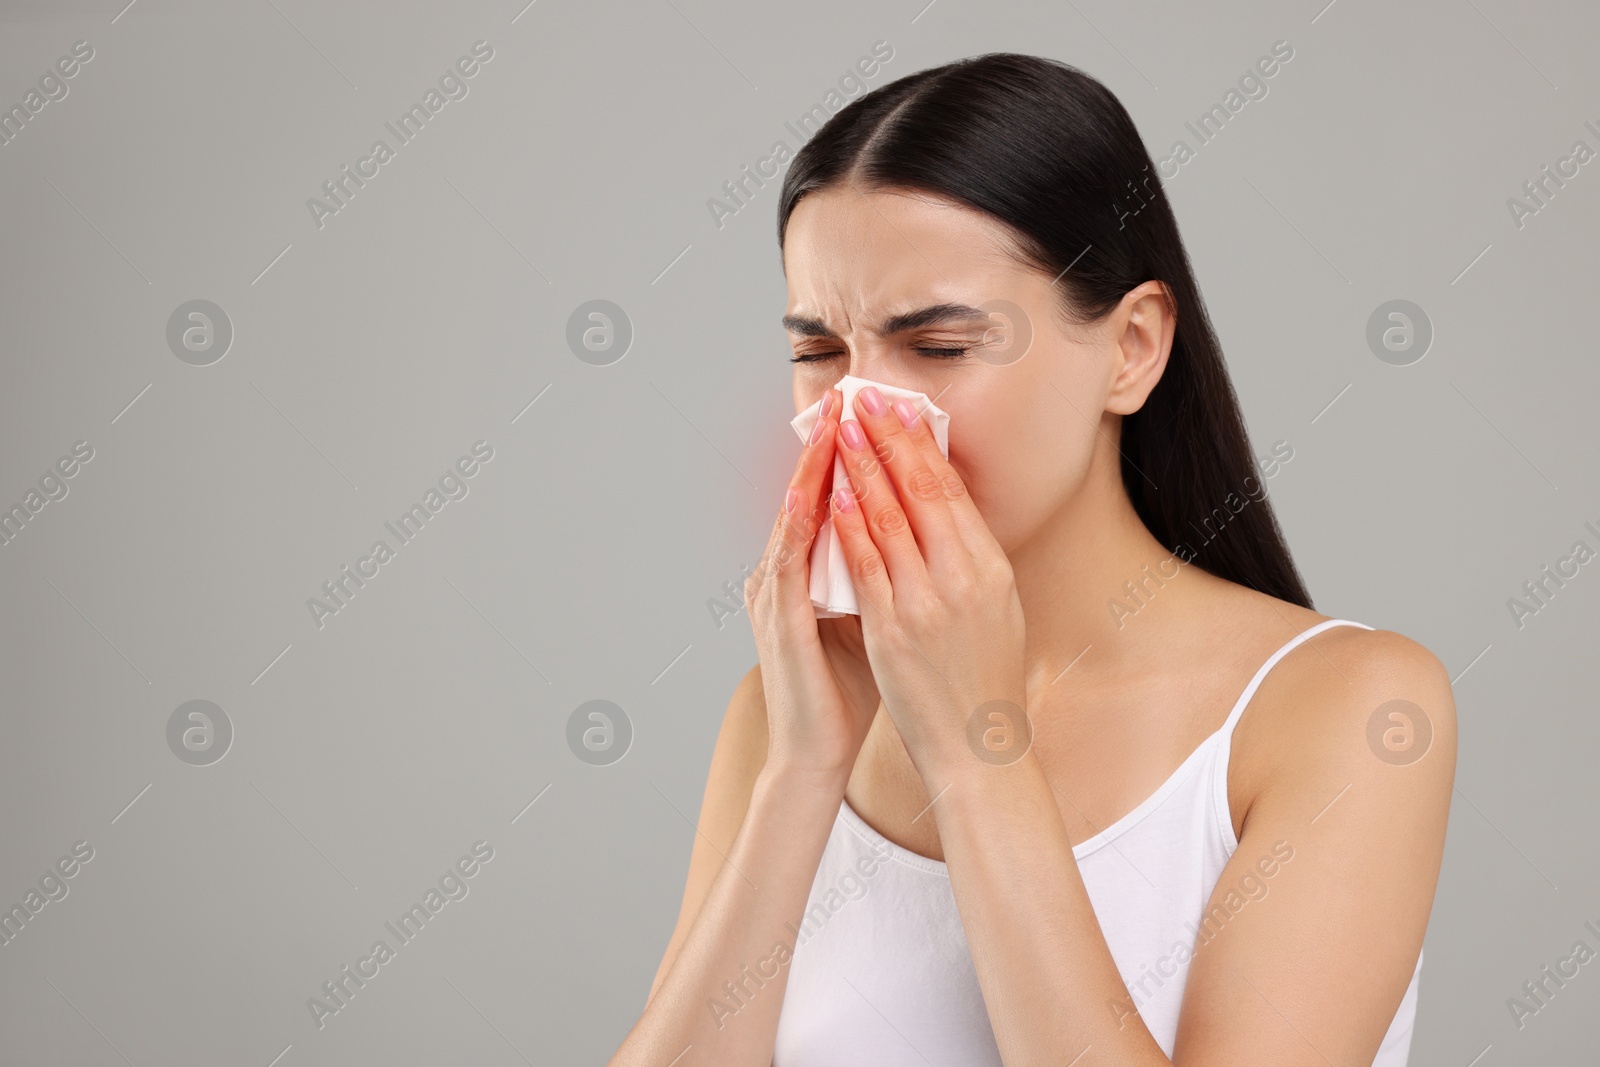 Photo of Suffering from allergy. Young woman blowing her nose in tissue on light grey background. Space for text